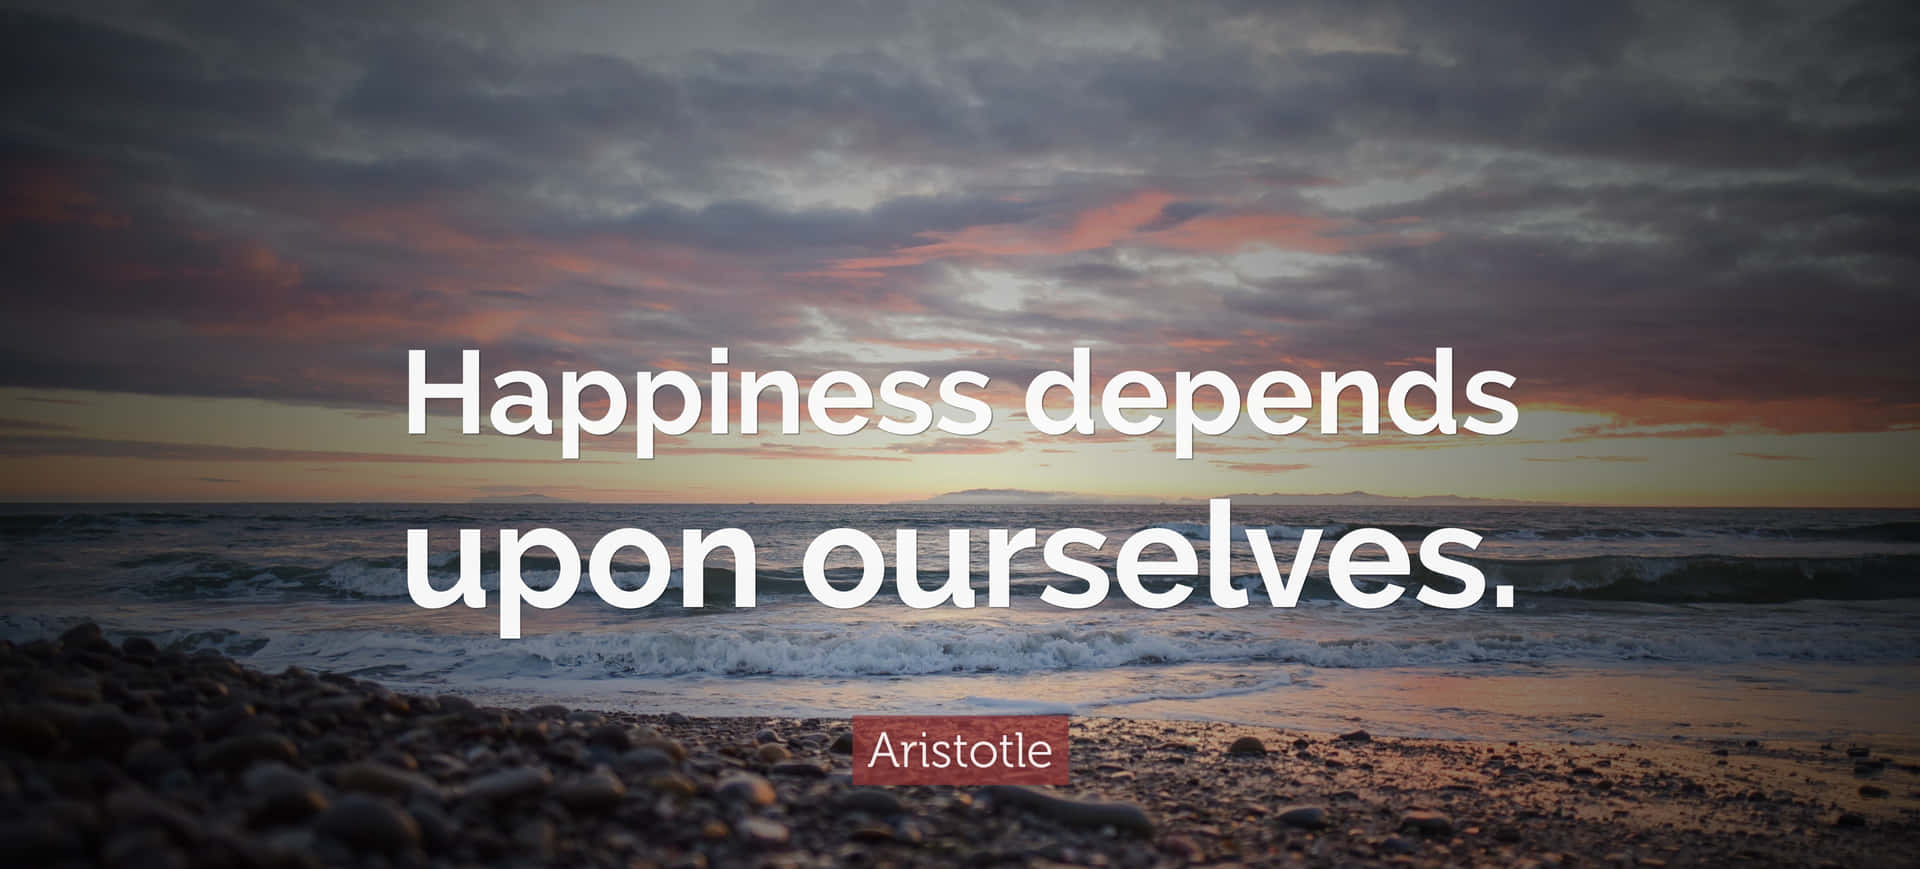 Inspiring Quote On Happiness In A Sunny Nature Background